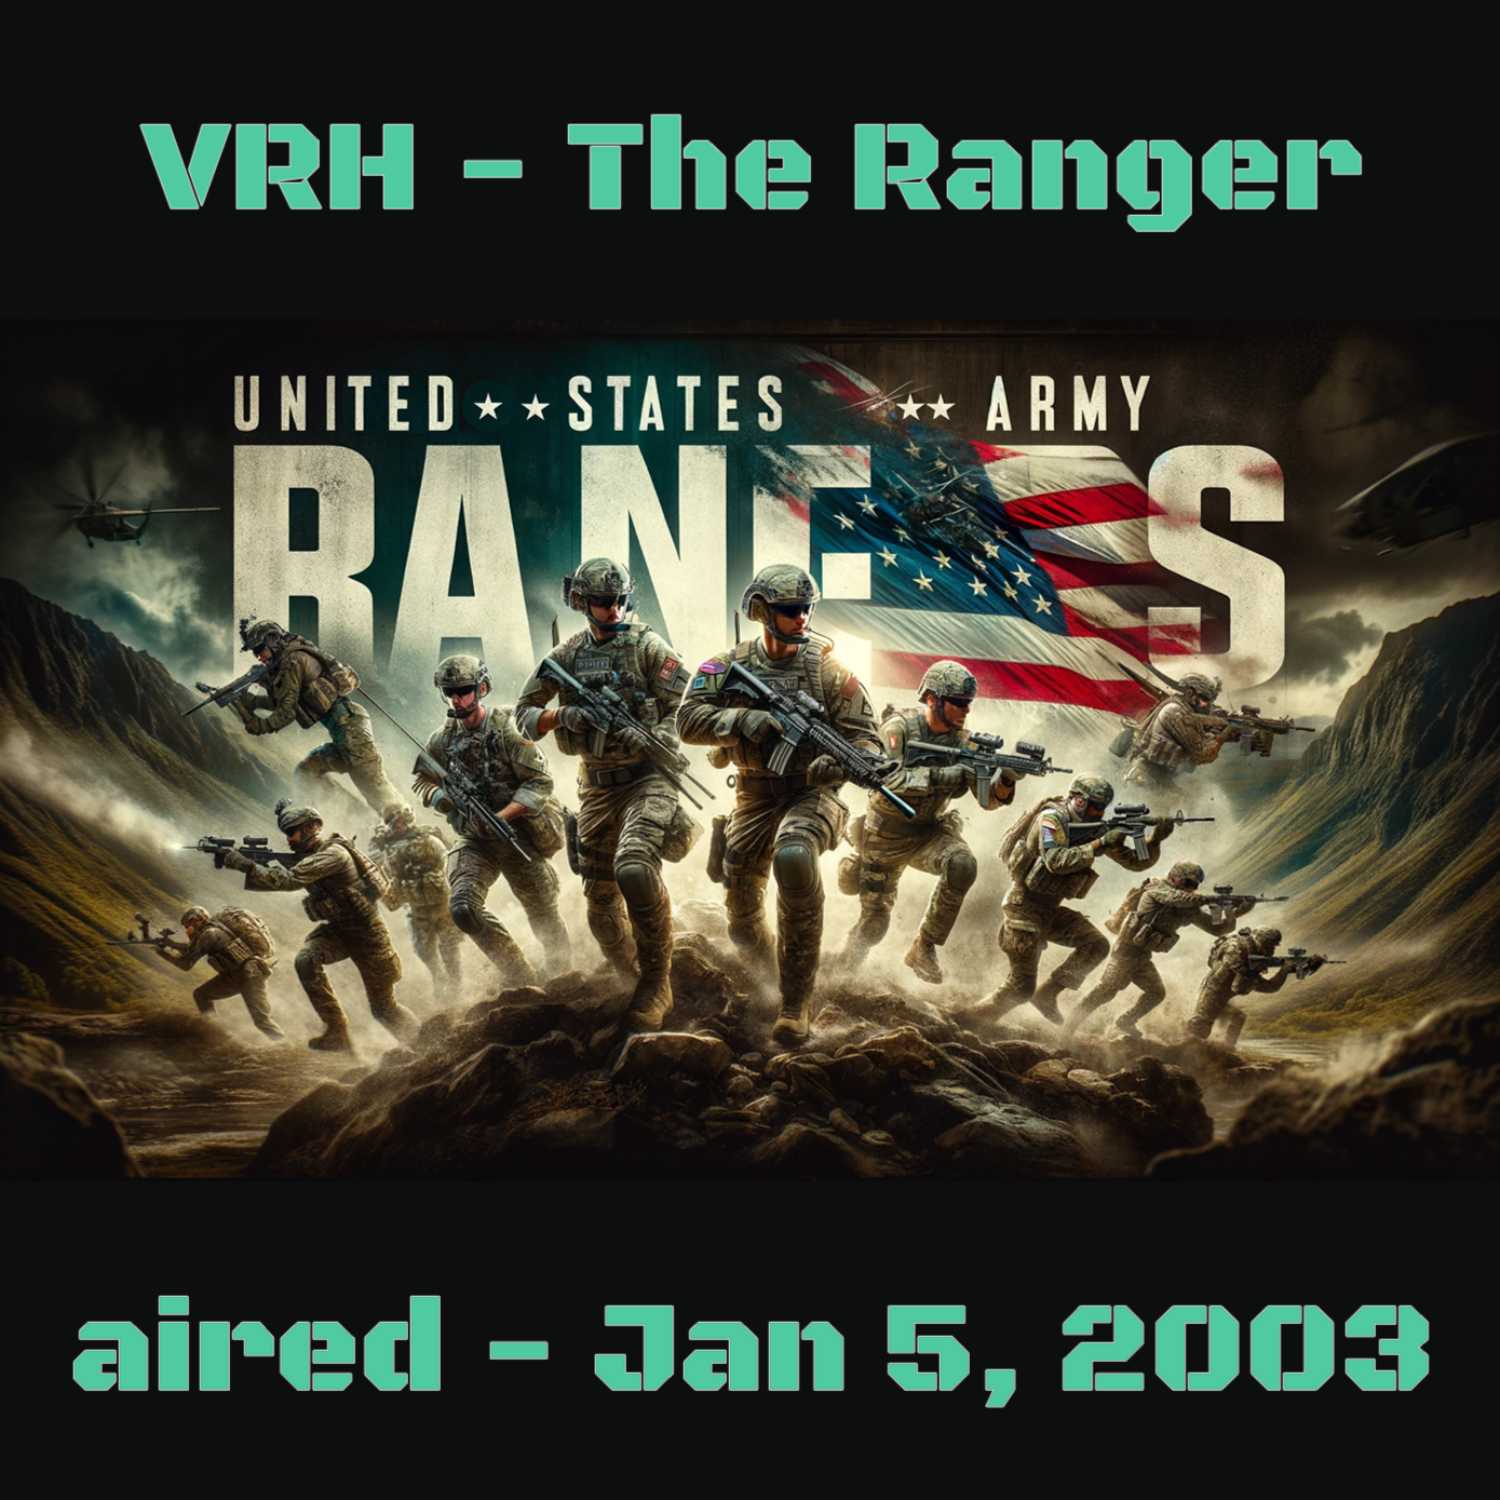 VRH - The Rangers - aired - Jan 5, 2003